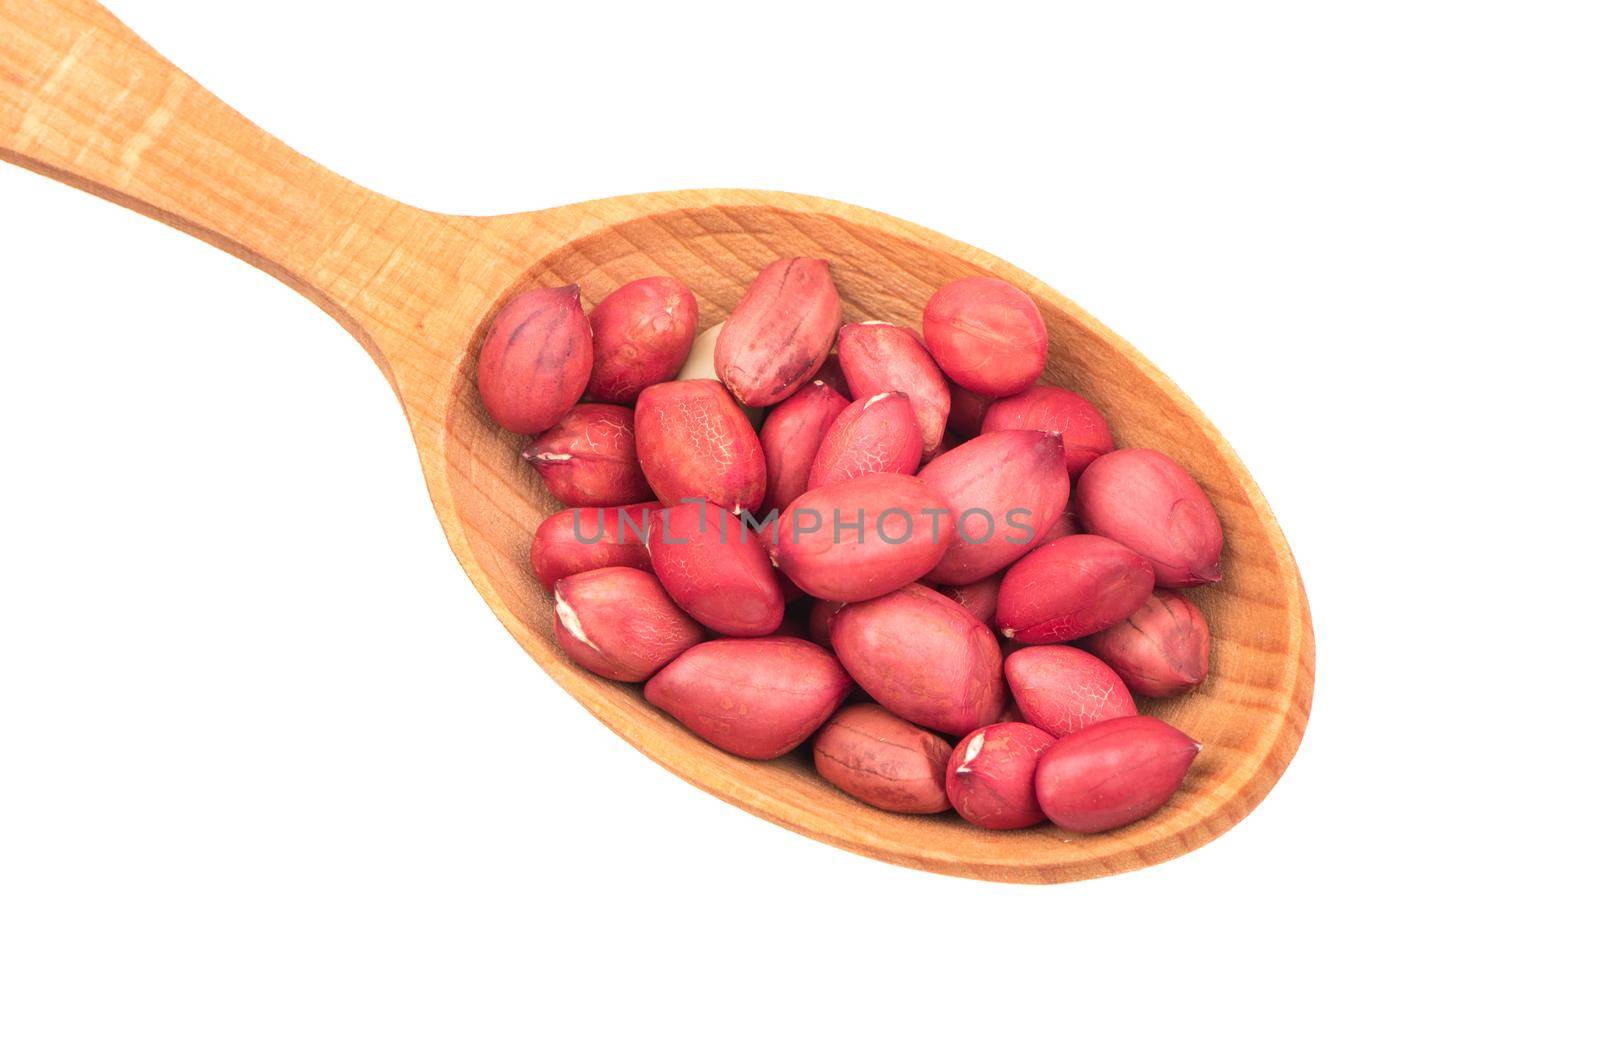 Peanut kernels in a wooden spoon on a white background